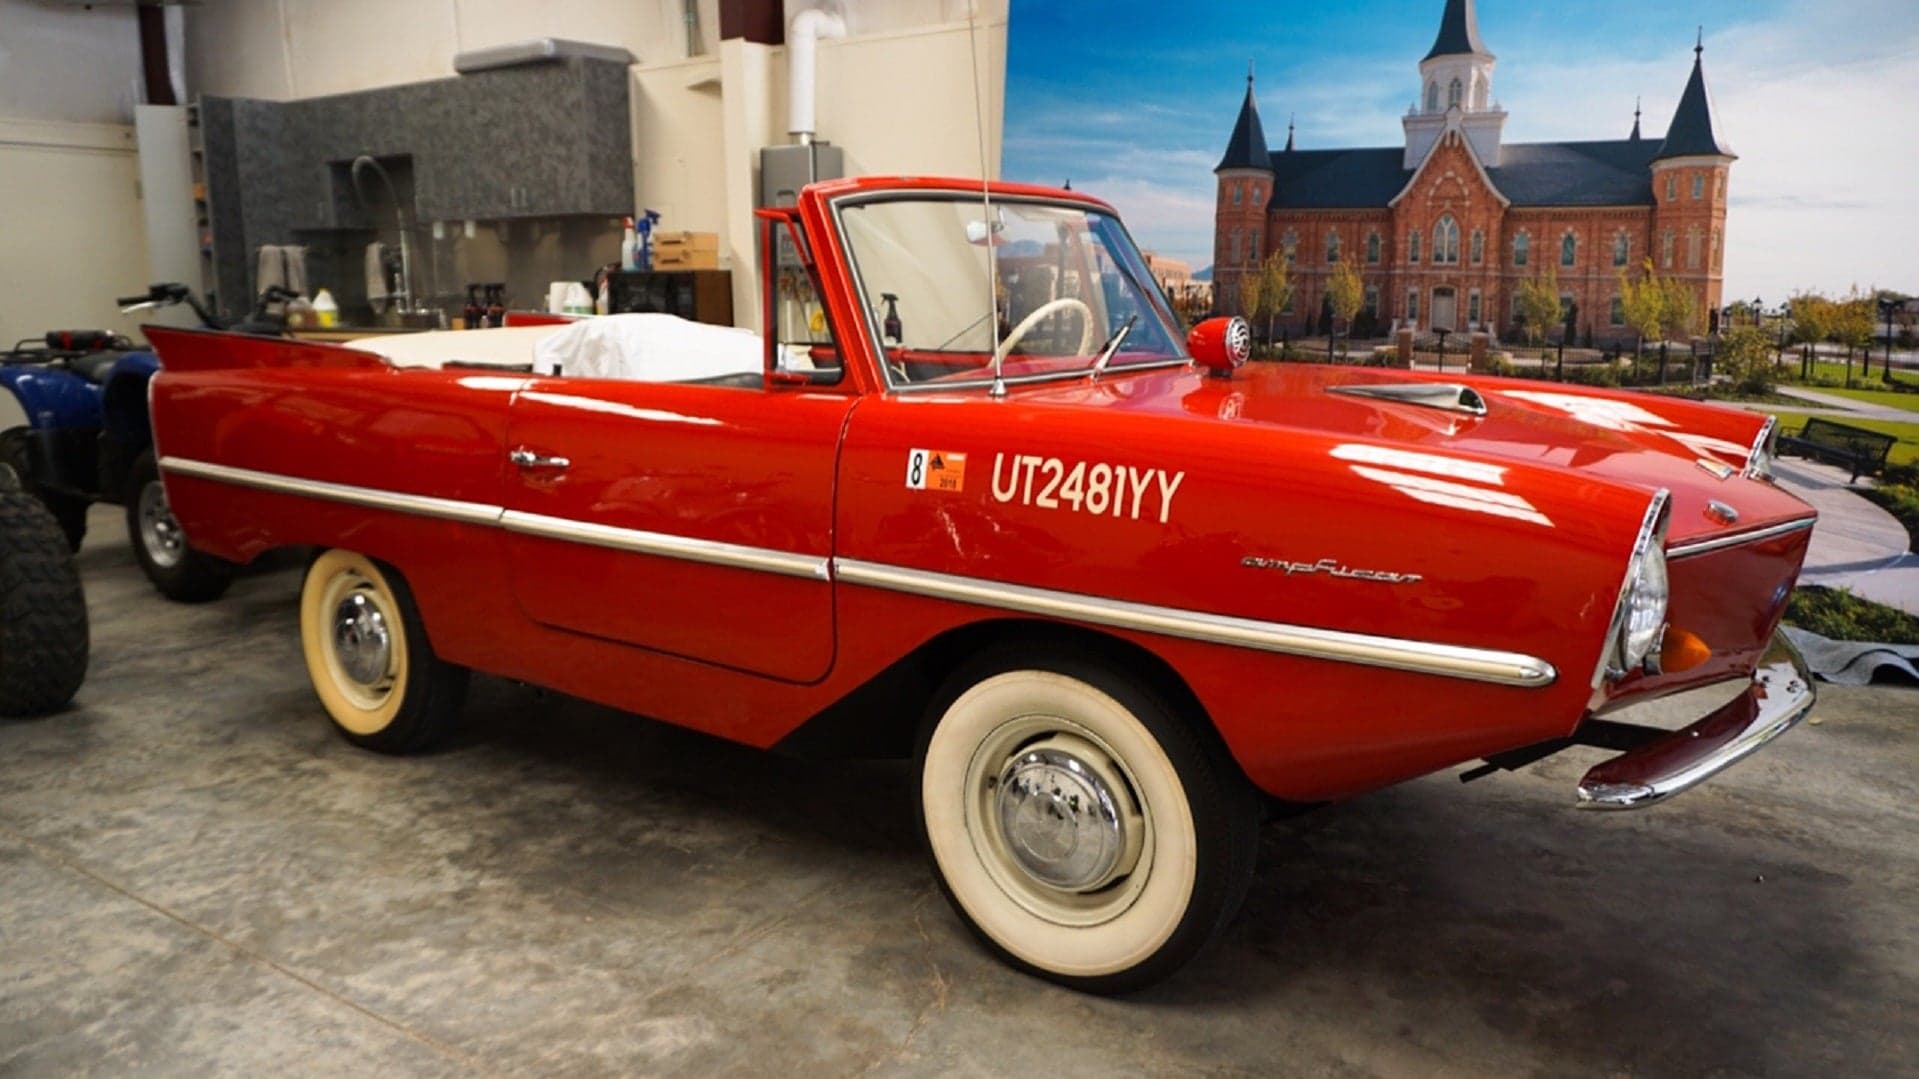 This Sweet Little Amphicar Can Coast on Land and in Water